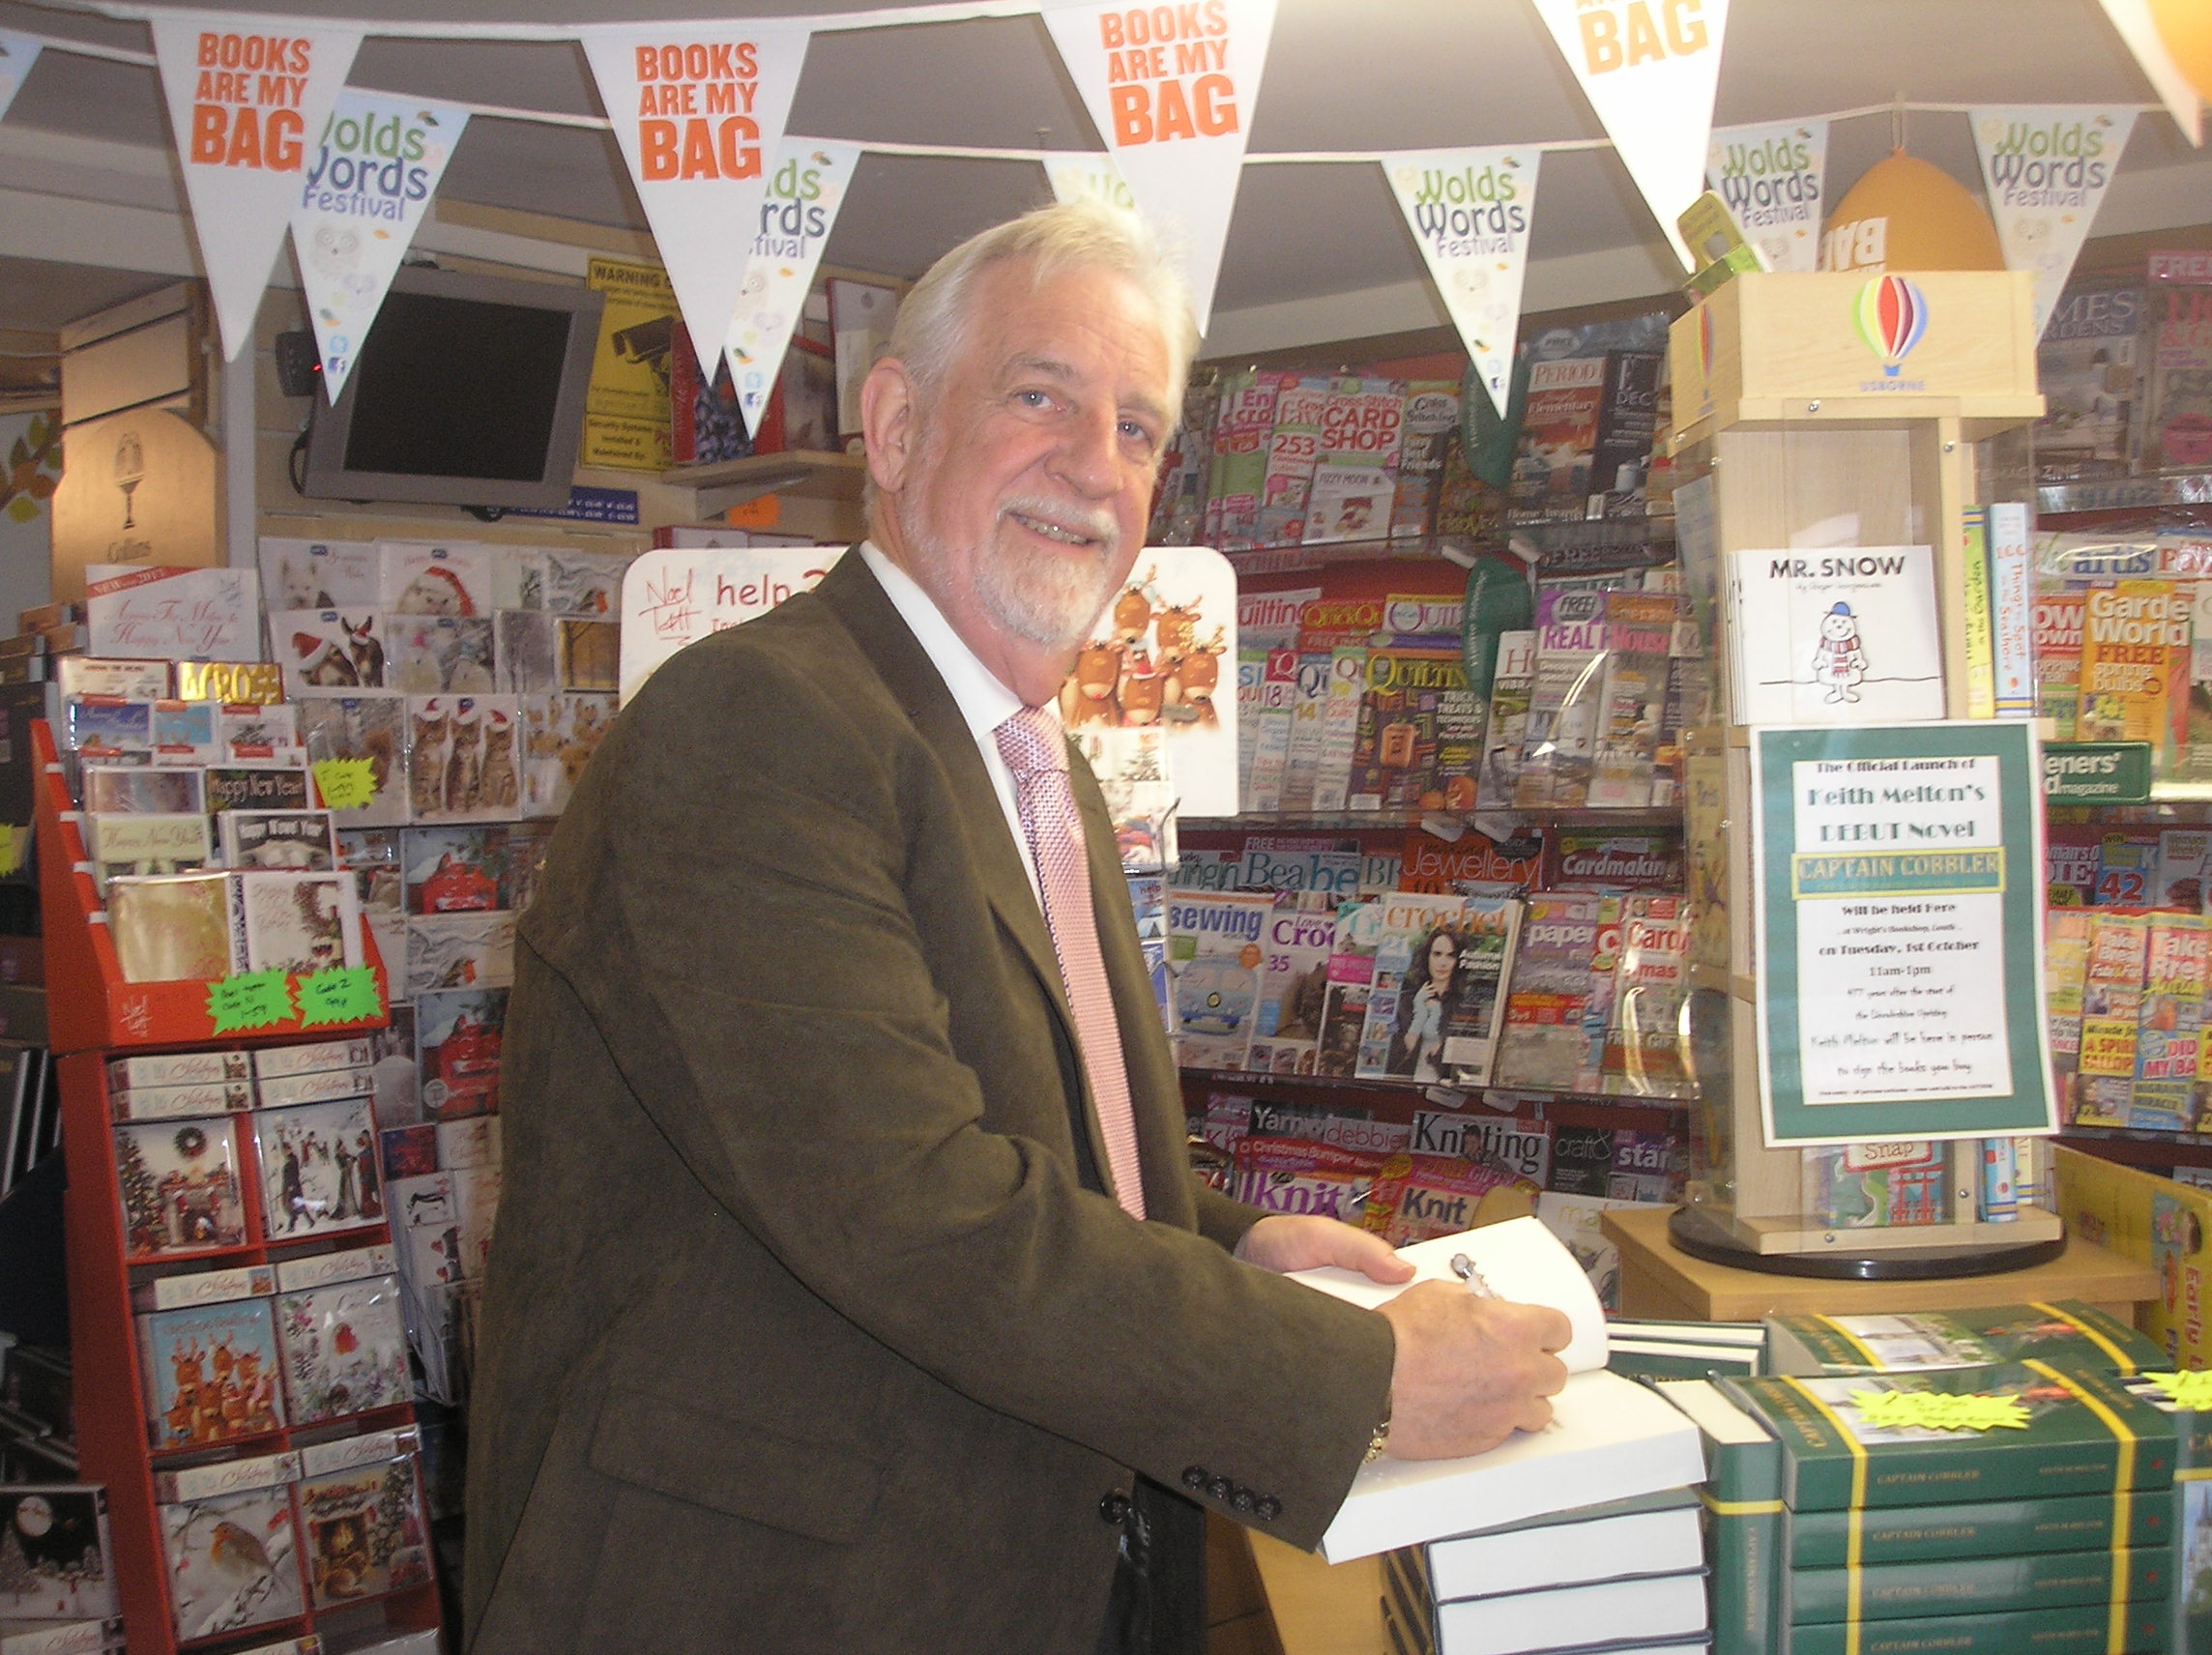 Book signing at the launch of my novel on 1st October 2013 - 477th anniversary of the Lincolnshire Uprising which started in Louth, Lincolnshire, UK